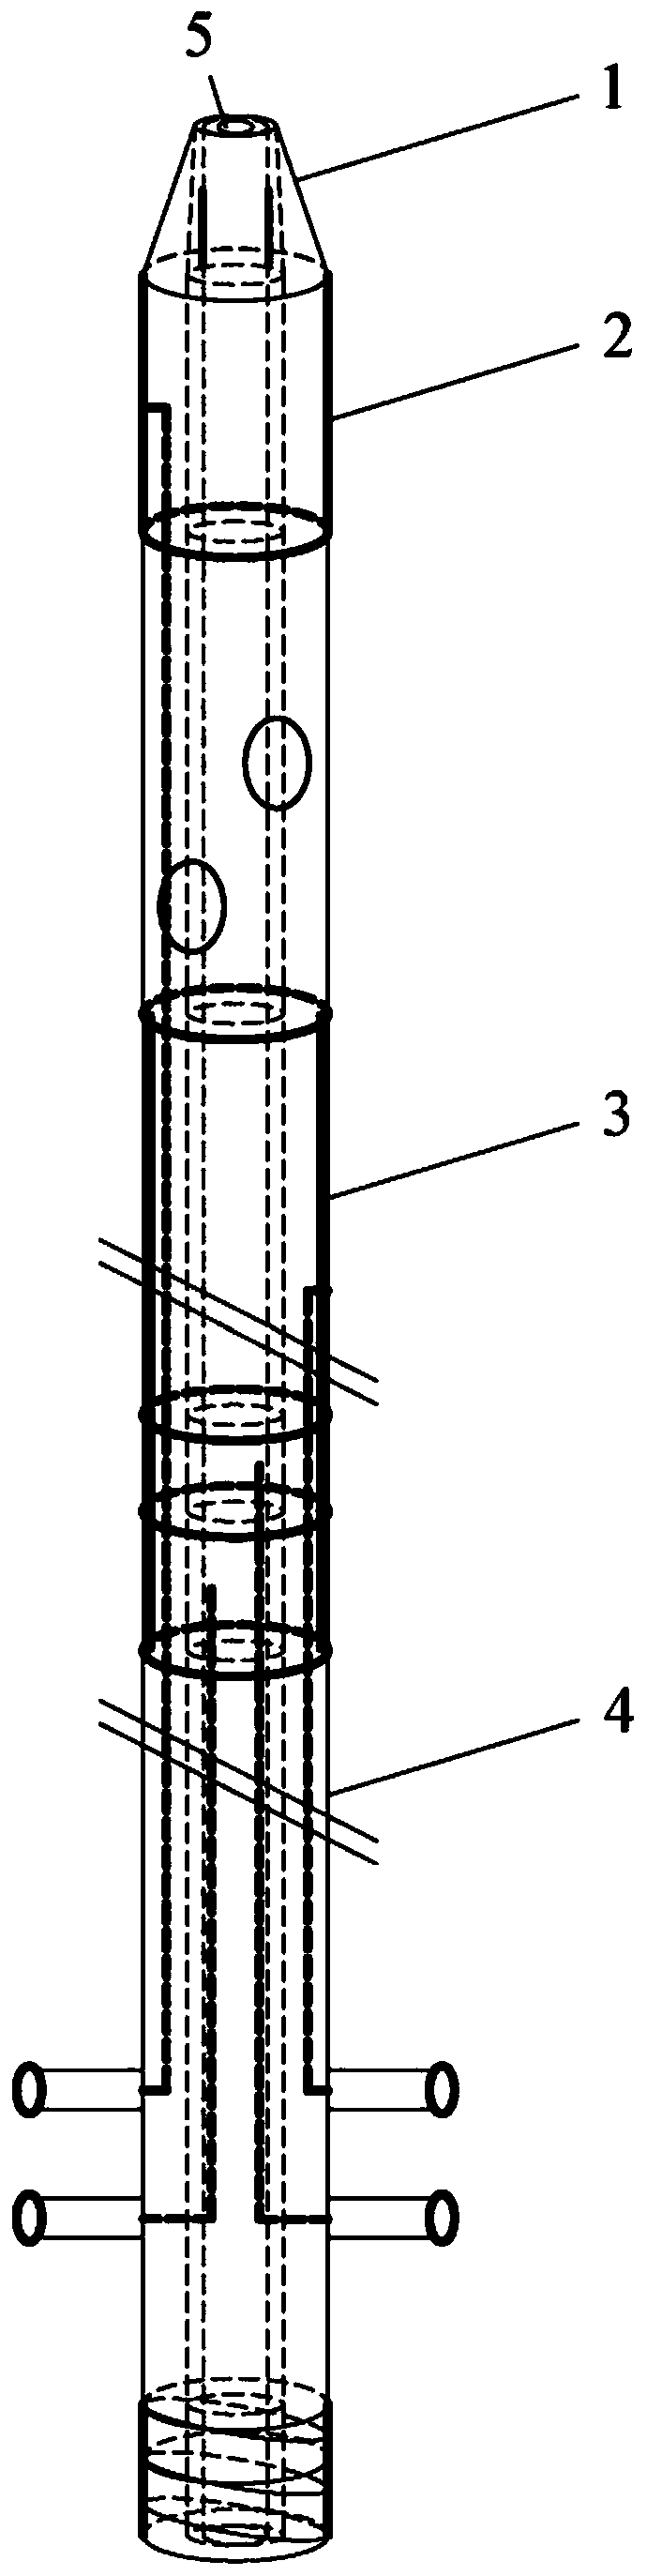 Multistage fistulous tract expanding type puncturing drainage tube having balloon